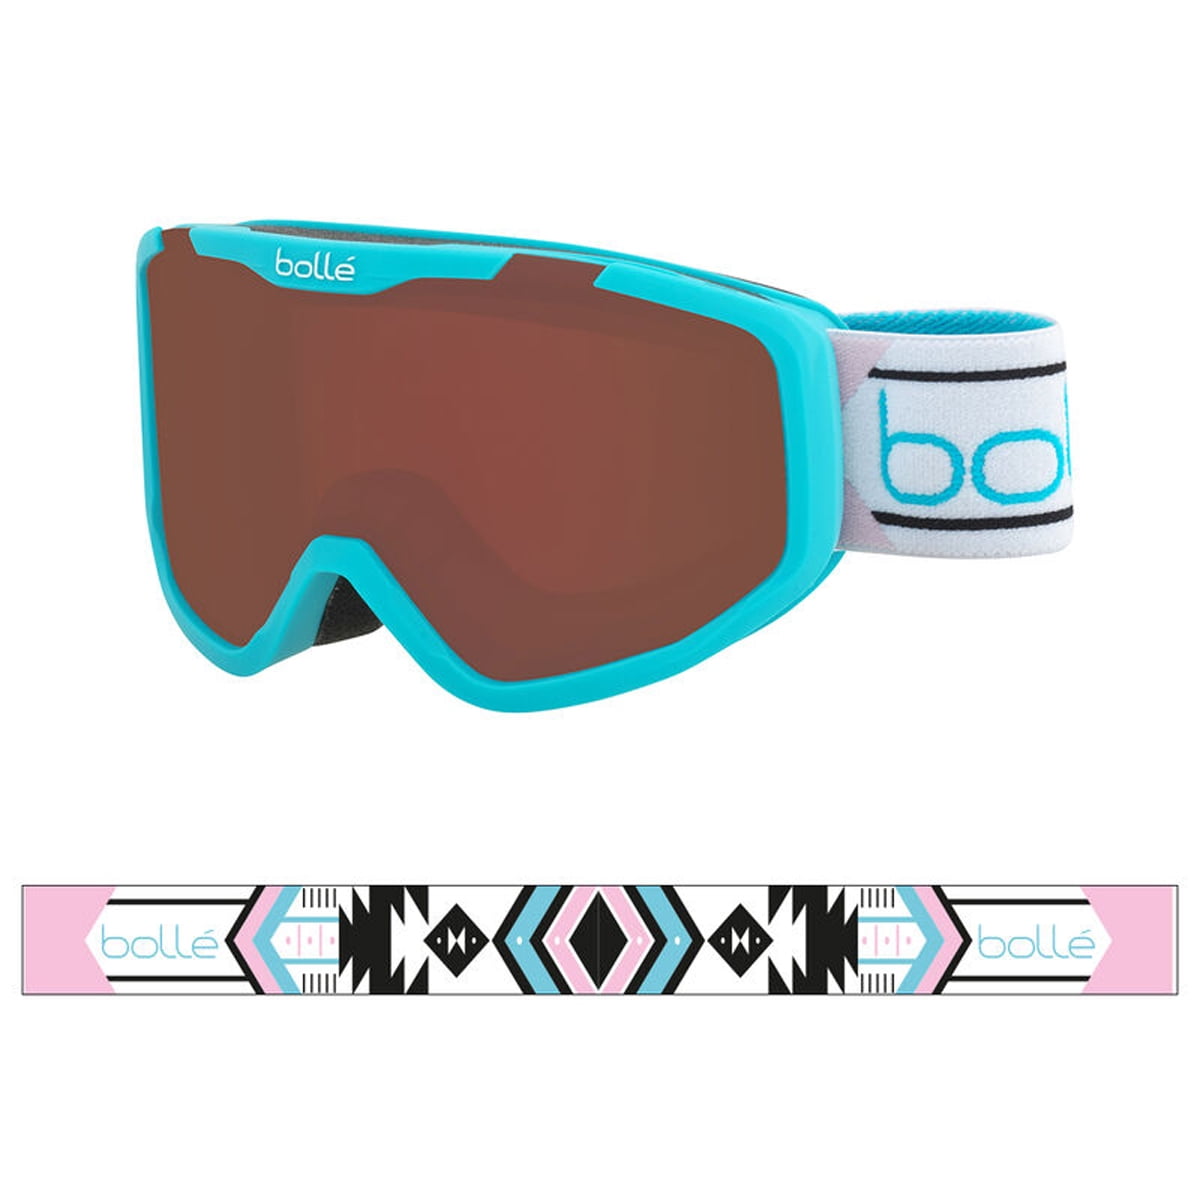 Bolle Girls Rocket Ski Goggles Matte Pink RRP£29 Rosy Bronze Lens Small Age 6 